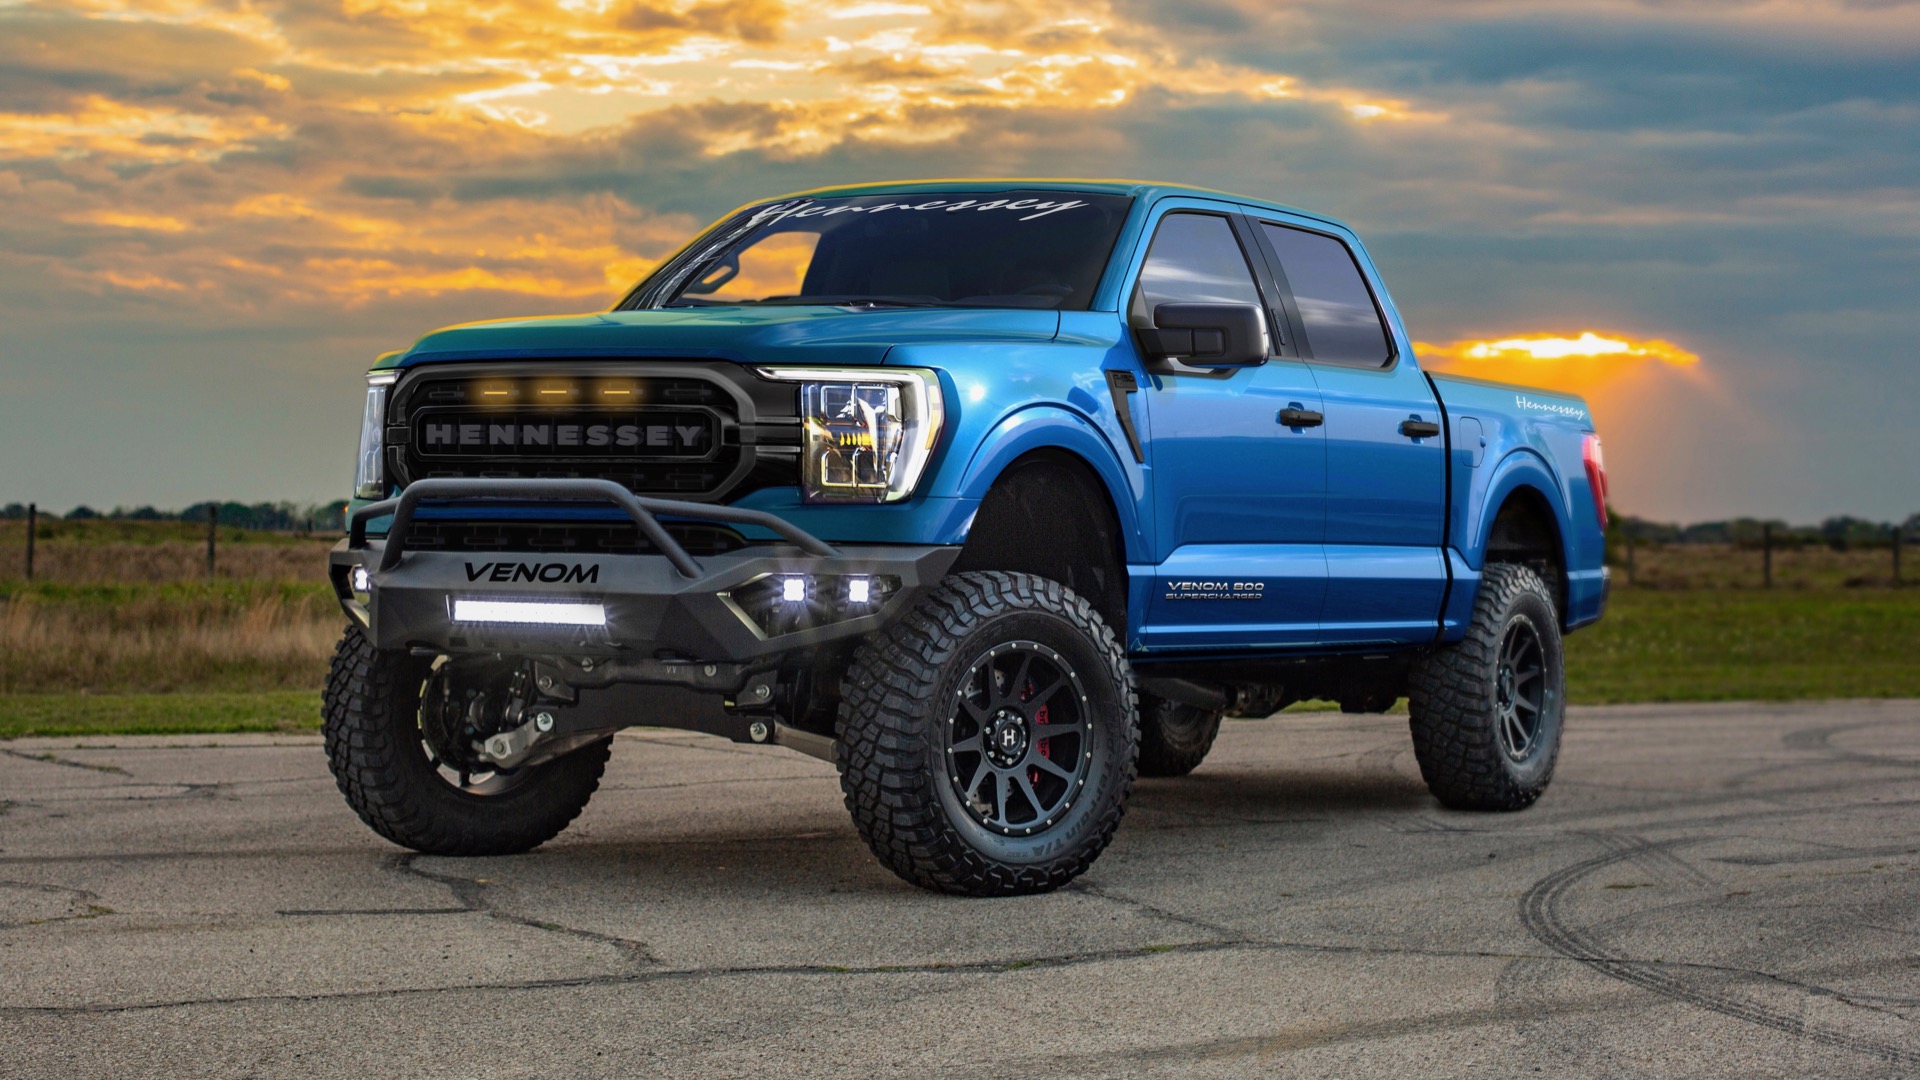 21 Ford F 150 Based Hennessey Venom 800 Supercharged Aims To Best The Ram 1500 Trx